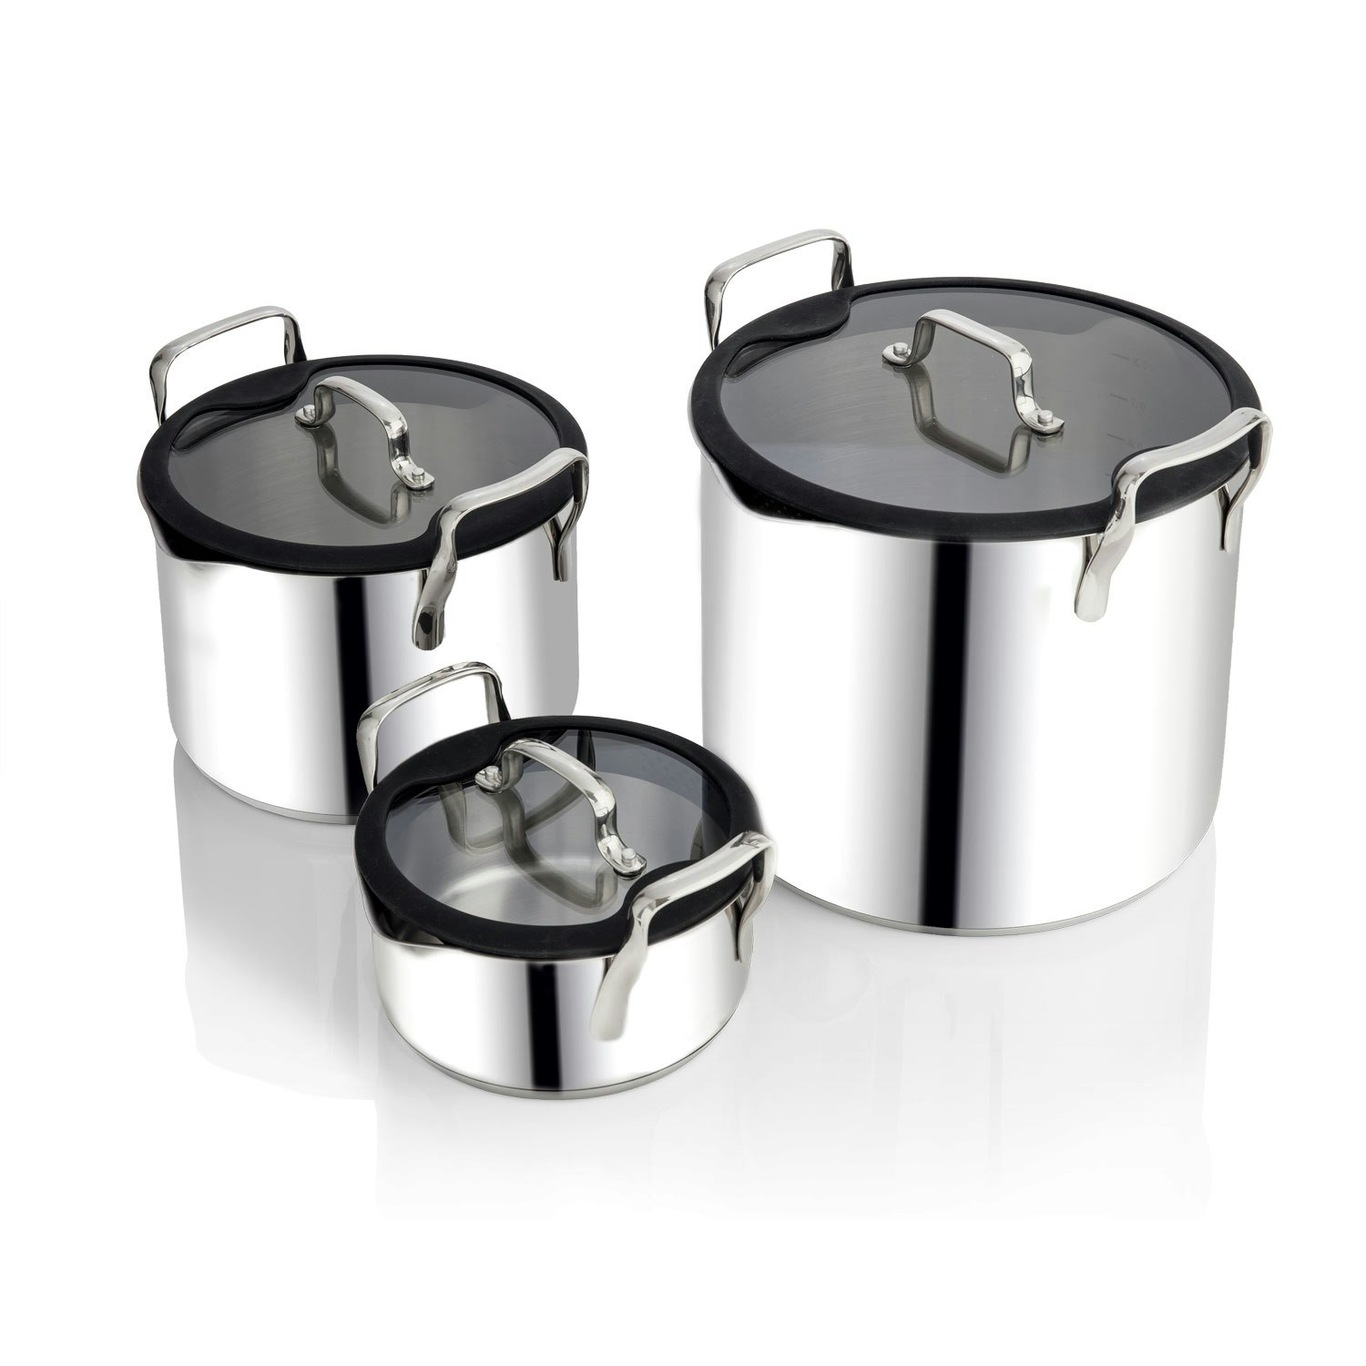 Jamie Oliver Cook's Classic Pot Set Stainless Steel 7 Pieces